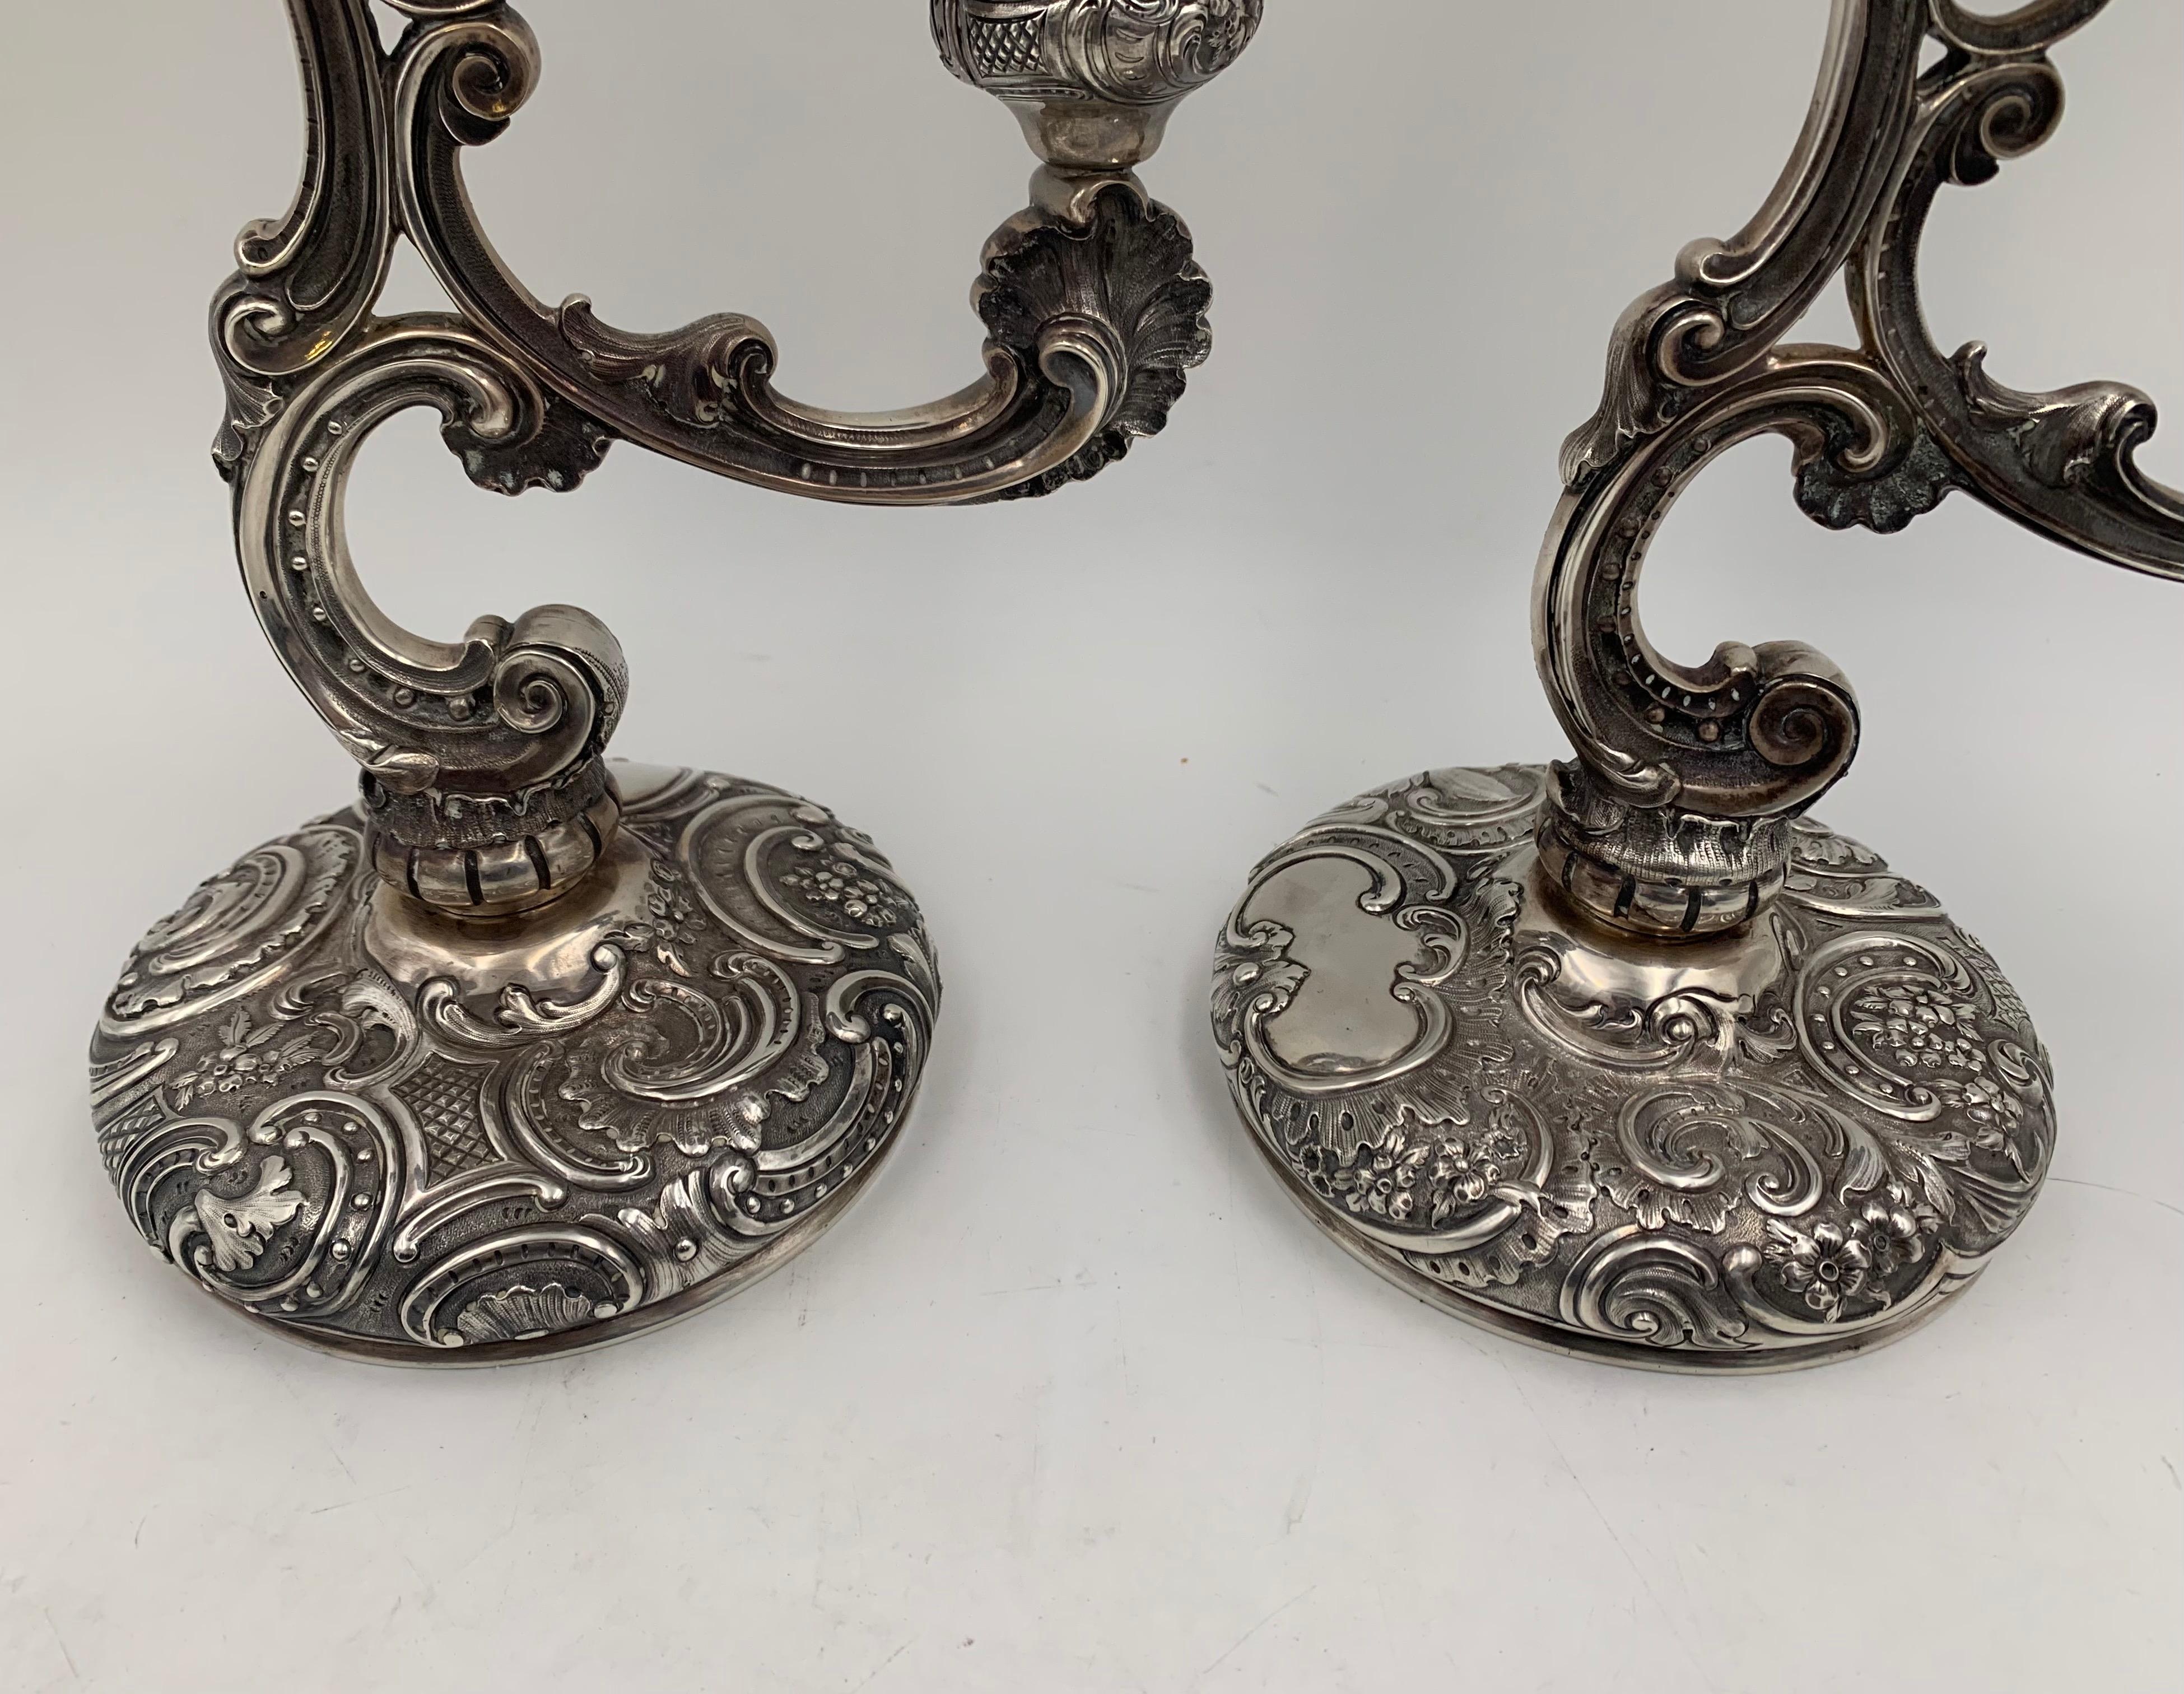 Pair of finely chased, 3-light English sterling silver candelabra by William Leuchars from 1889 with removable bobeches in ornate Rococo style with floral motifs and stylized, curvilinear designs. Each measures 11 1/2'' in height by 9 1/2'' in width